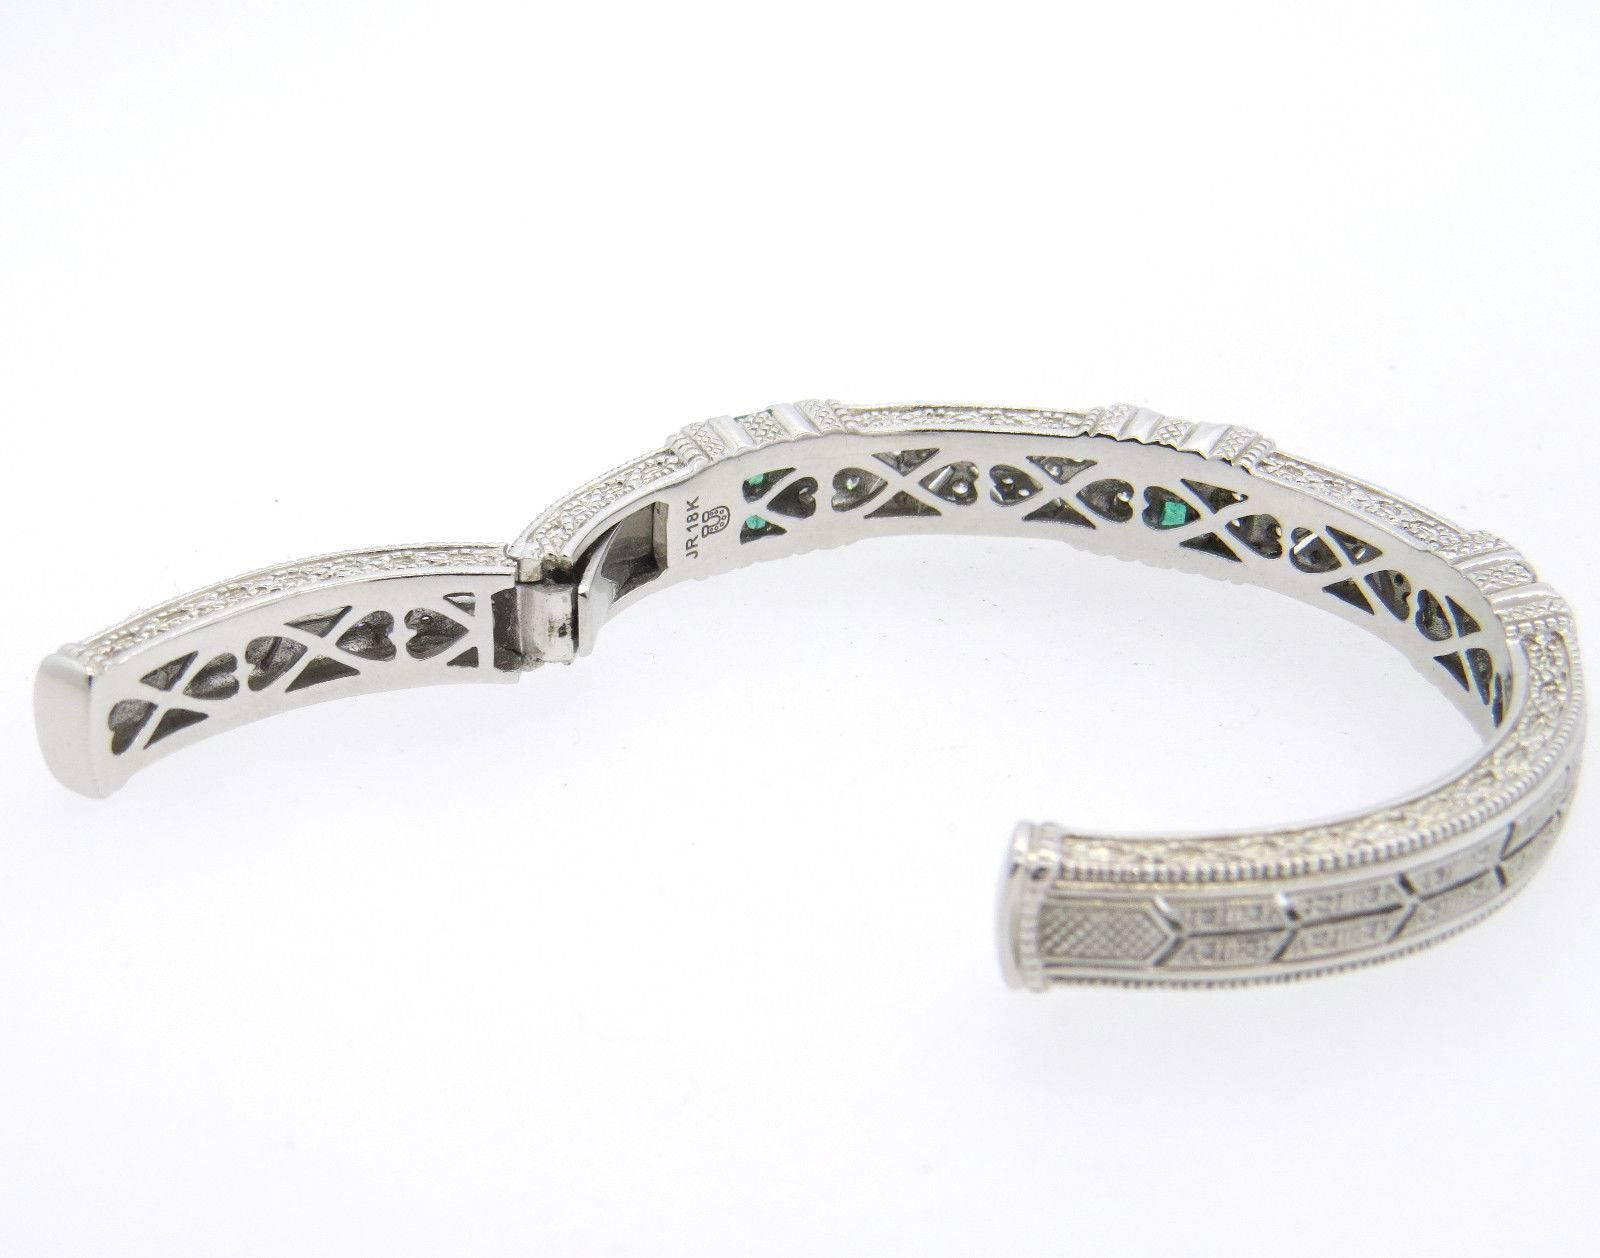 An 18K white gold bracelet set with emeralds and approximately 0.65ctw of H/VS diamonds.  Crafted by Judith Ripka for her Estate collection, the bracelet will fit up to 6 3/4